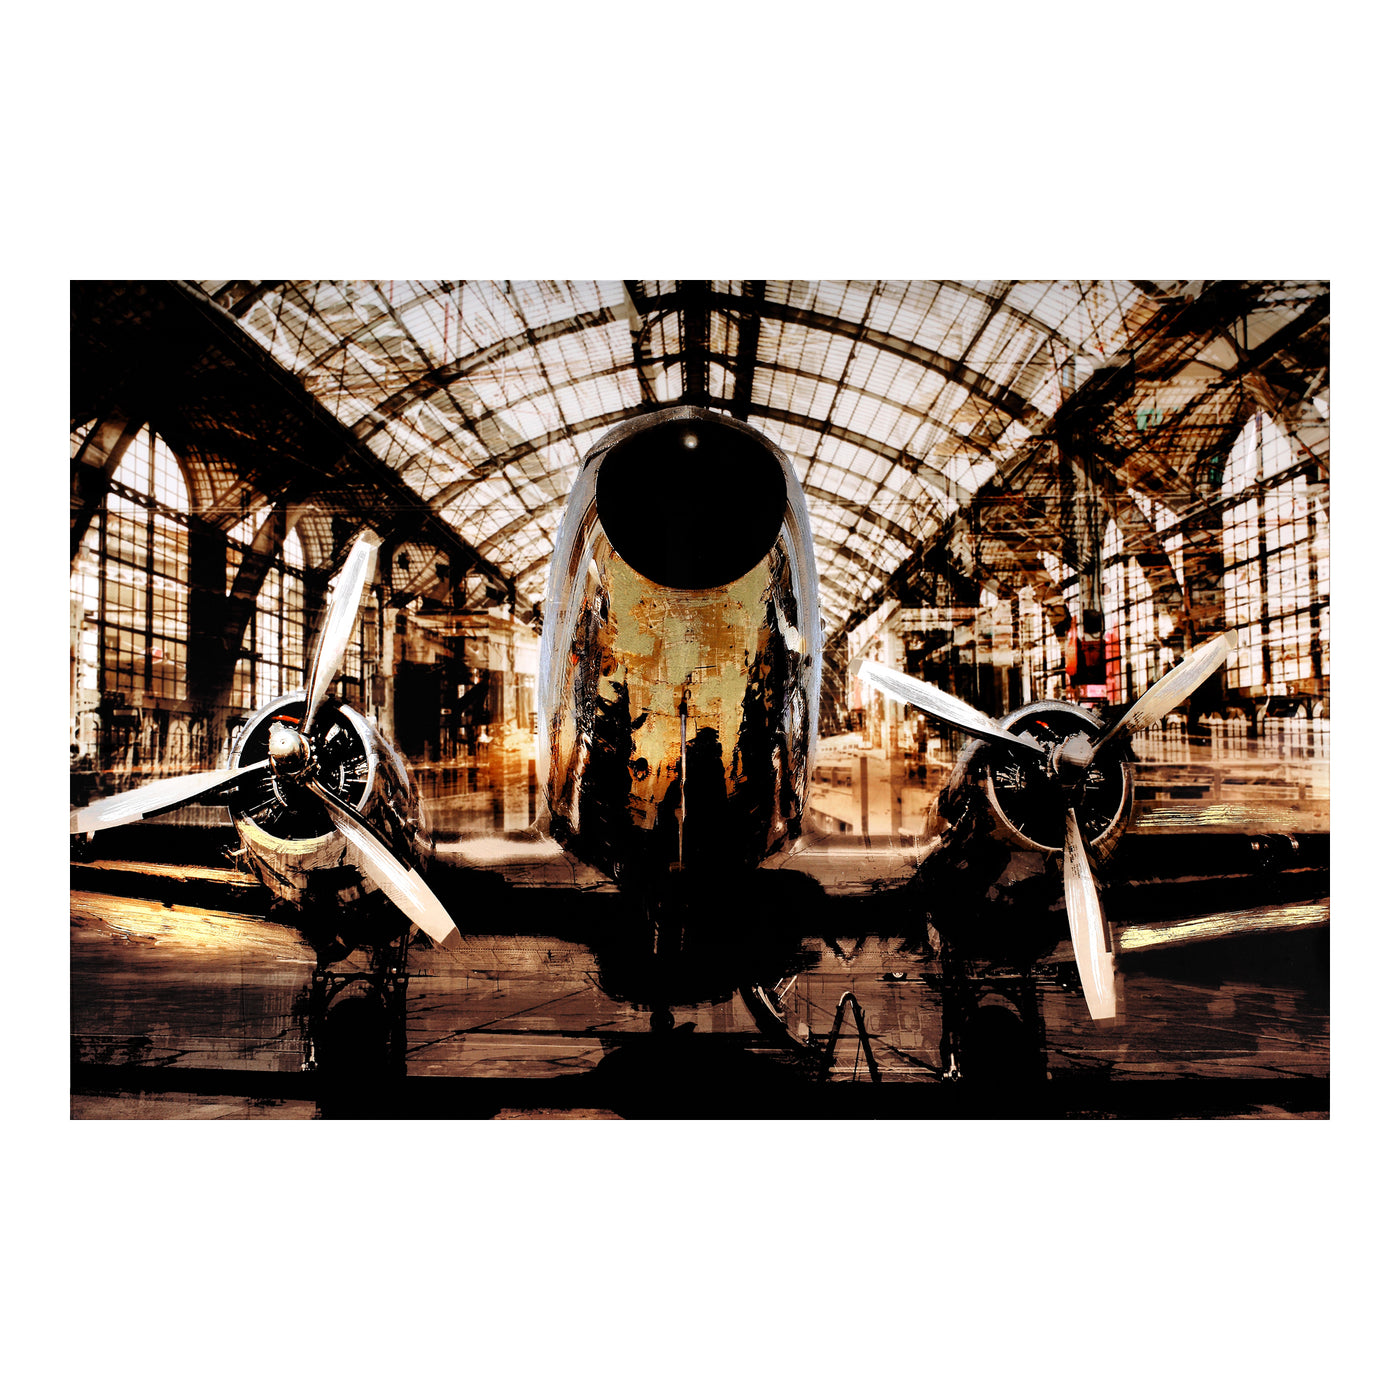 An image of a classic prop plane, sits under a retro glass hangar, awaiting its next mission vintage-inspired beauty, read...